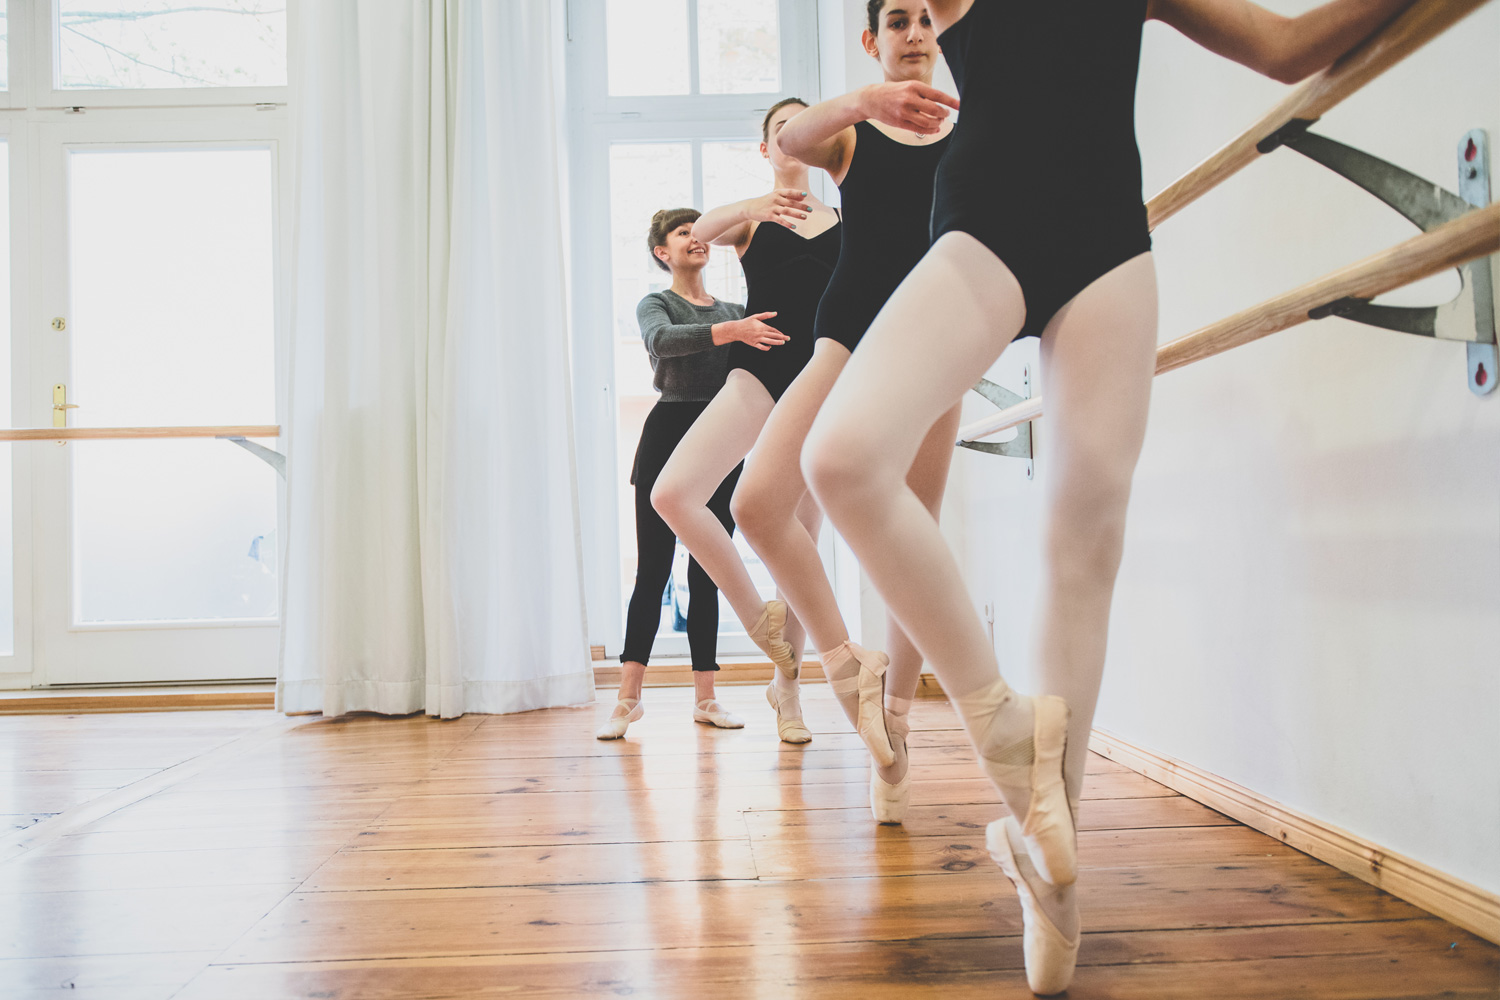 teenage girls at ballet barre in pointe work class